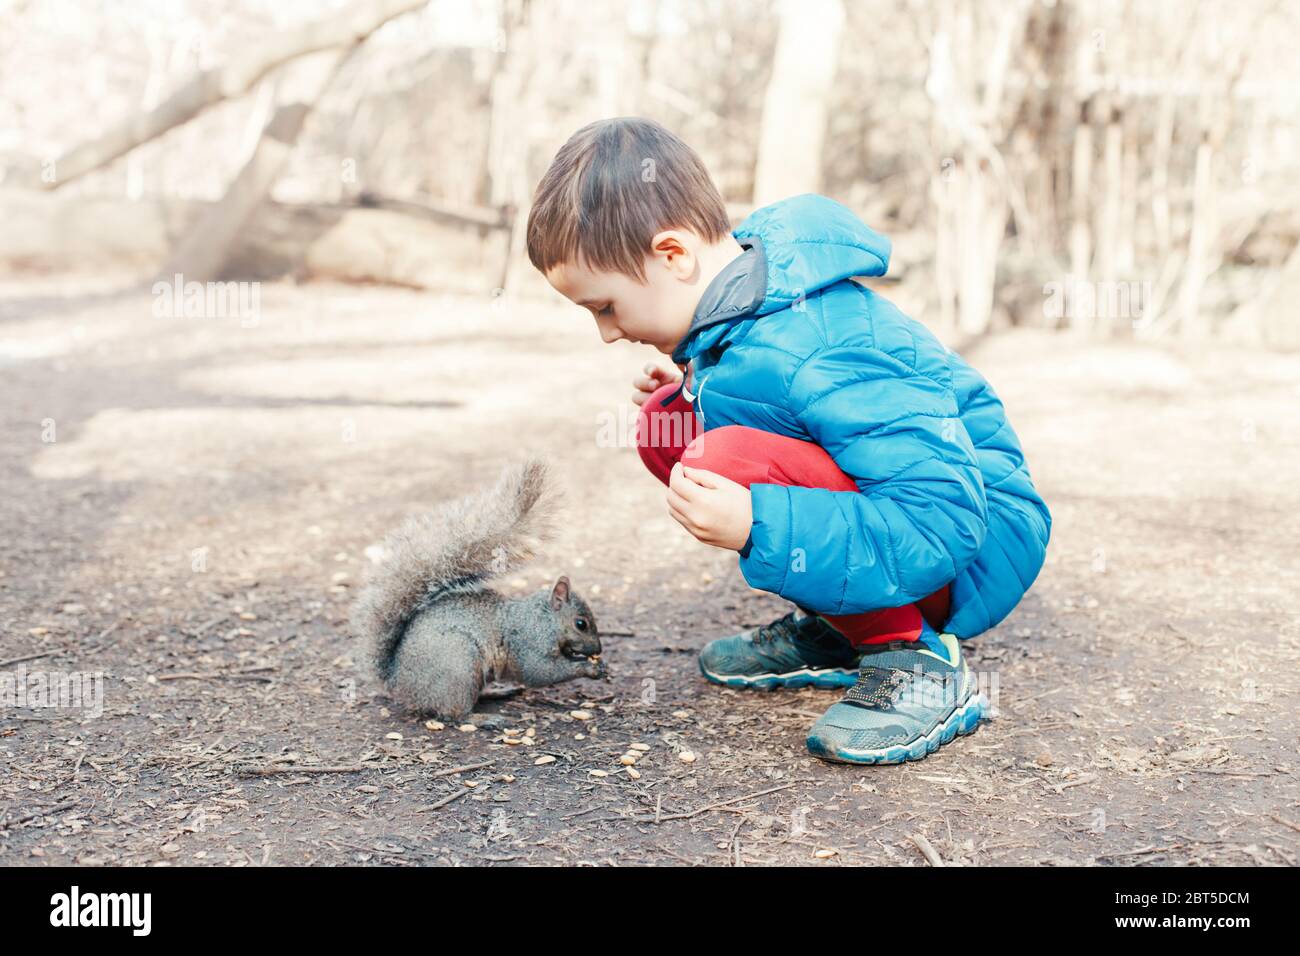 Cute Caucasian boy feeding grey squirrel in park. Adorable little kid giving food nuts to wild animal in forest. Child learning studying wild nature a Stock Photo